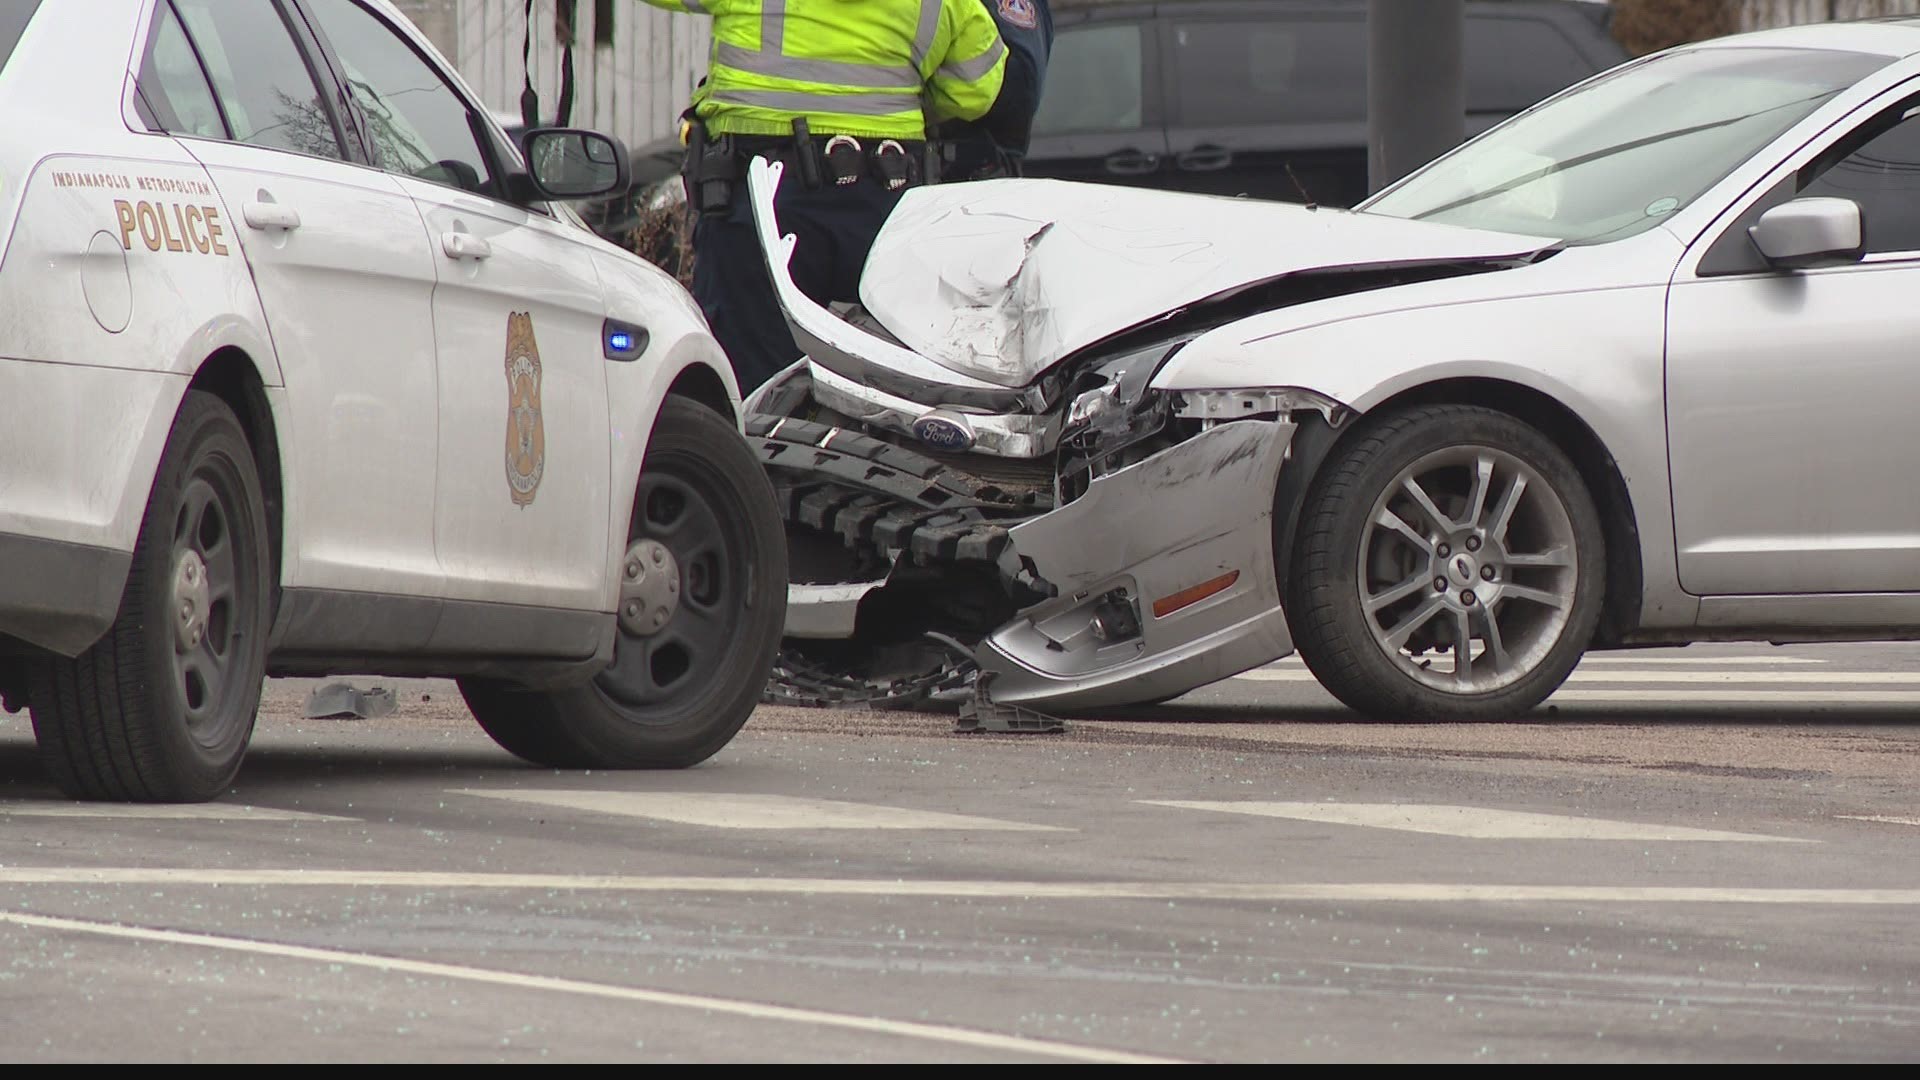 Metro police say a chase after a robbery suspect ended in a crash on the east side.